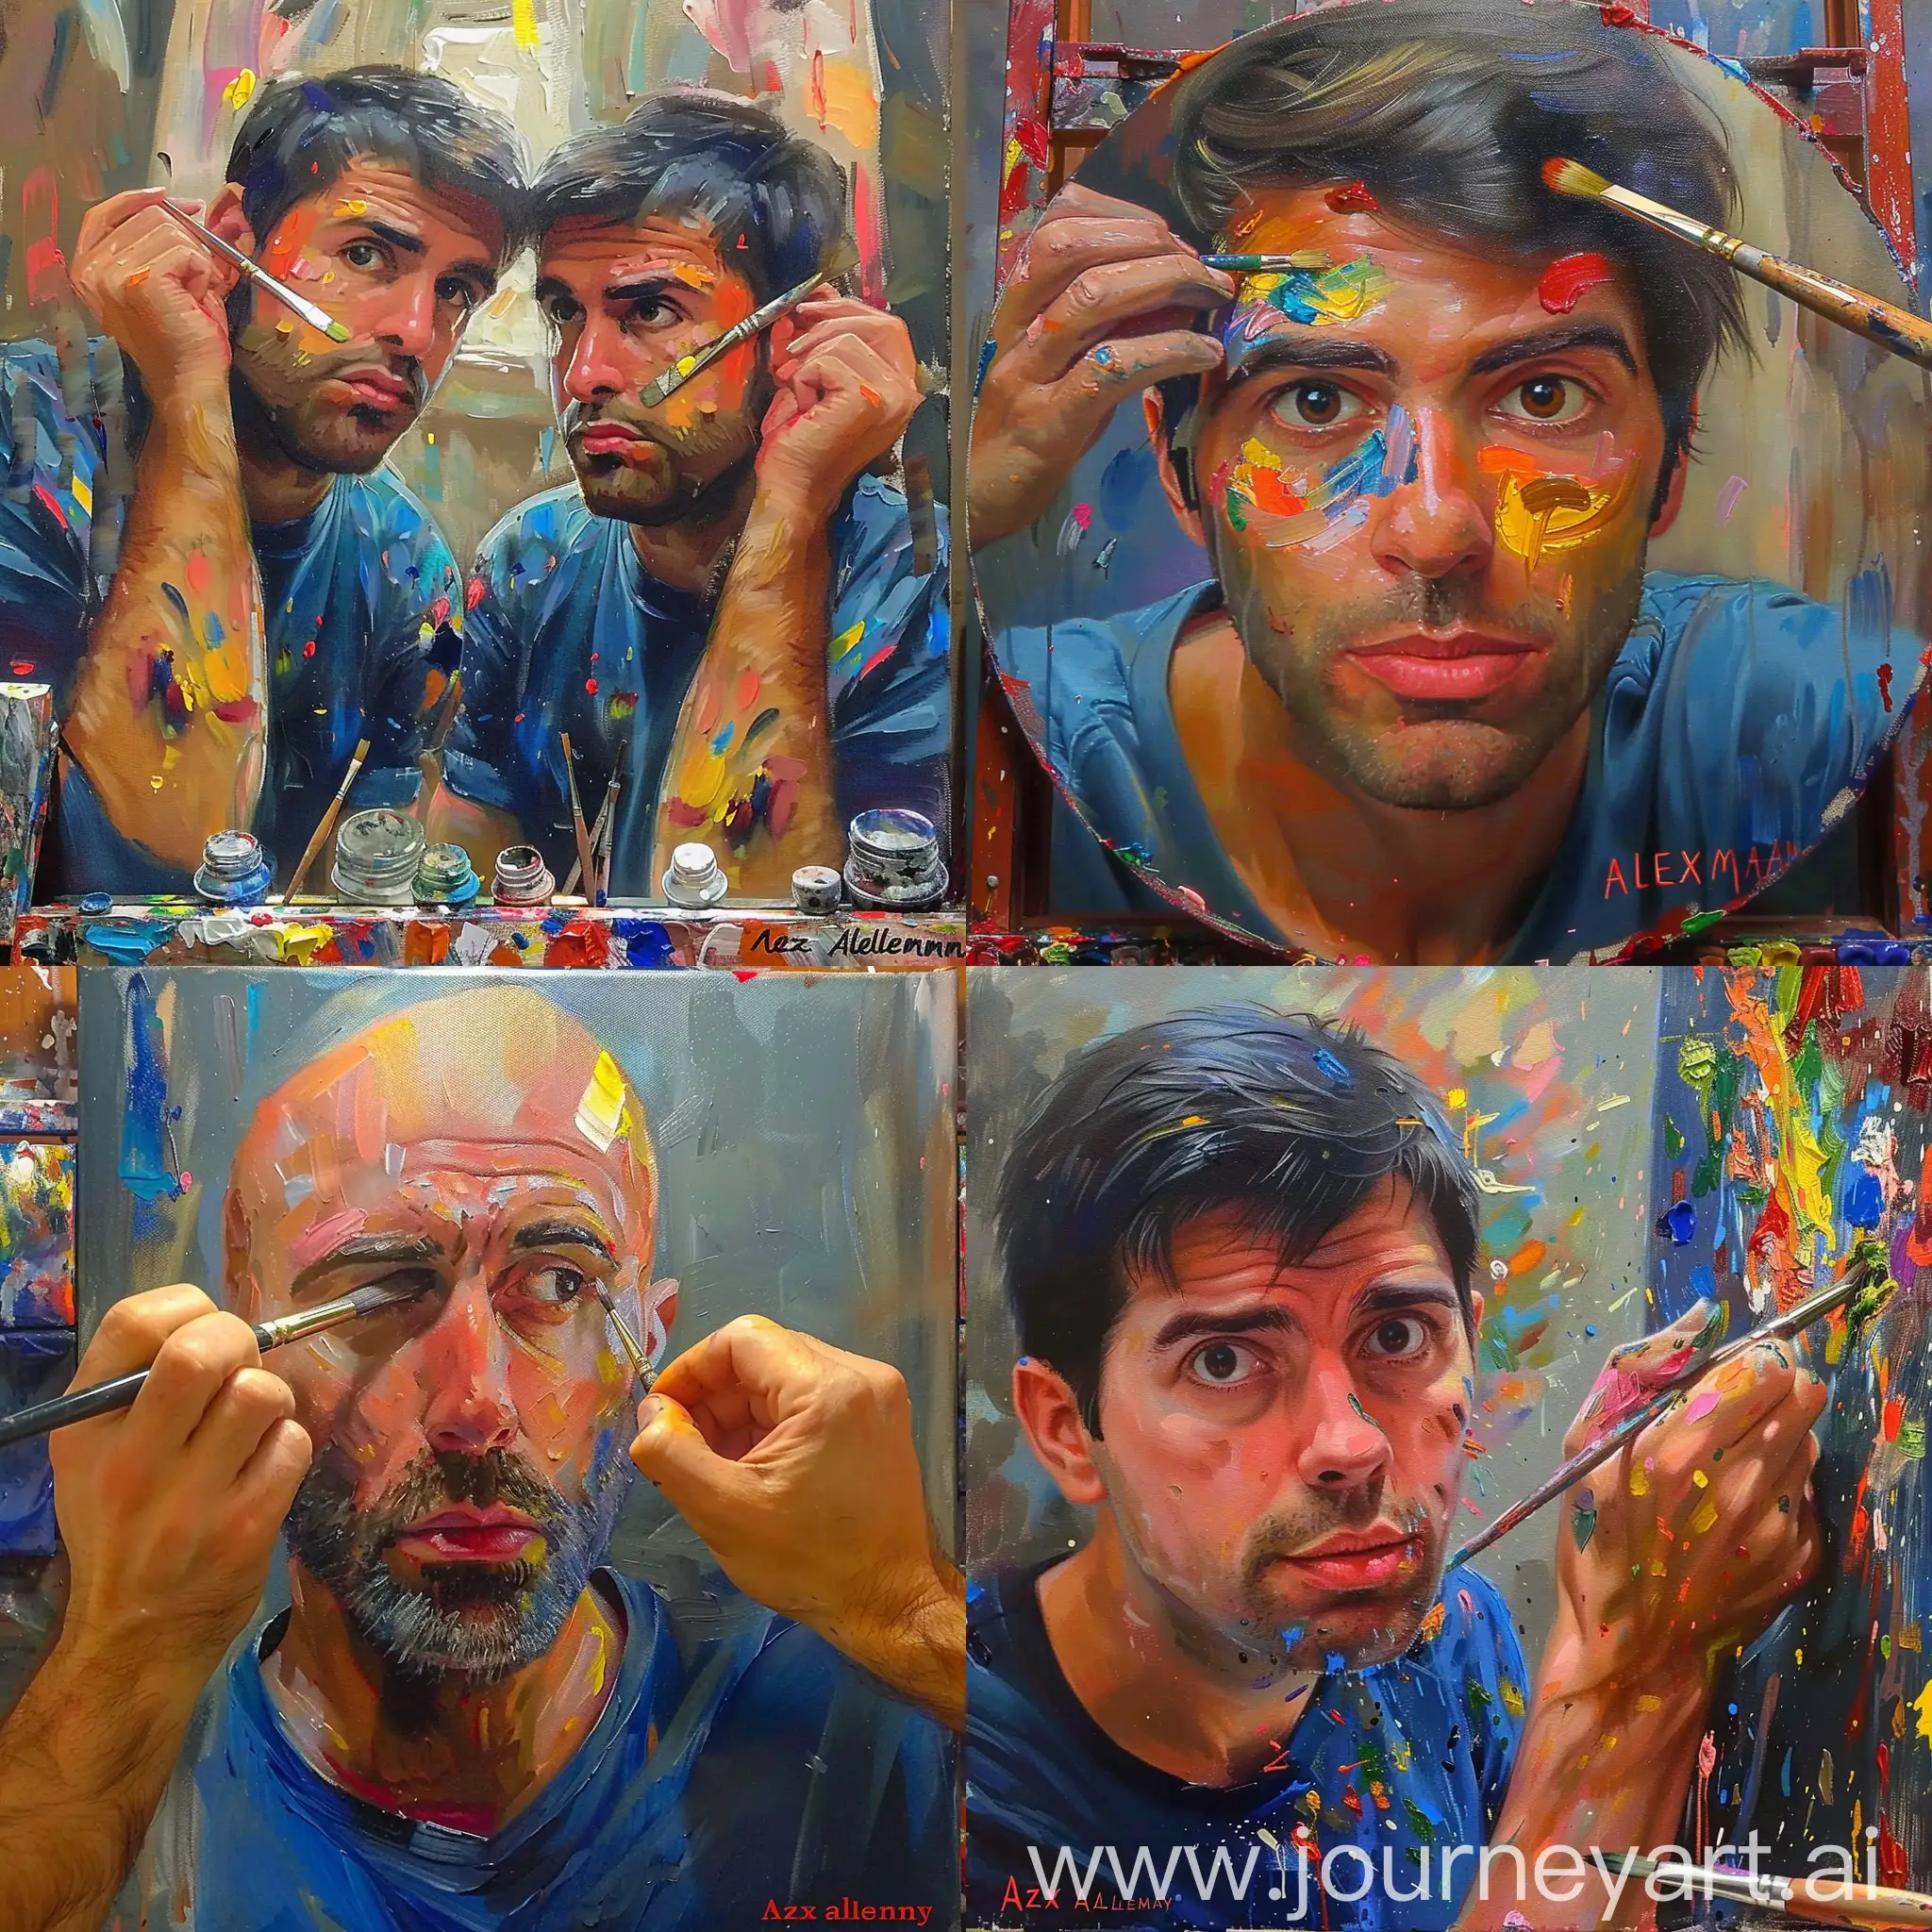 Artistic-SelfPortrait-Alex-Alemany-Capturing-His-Own-Image-in-a-Creative-Loop